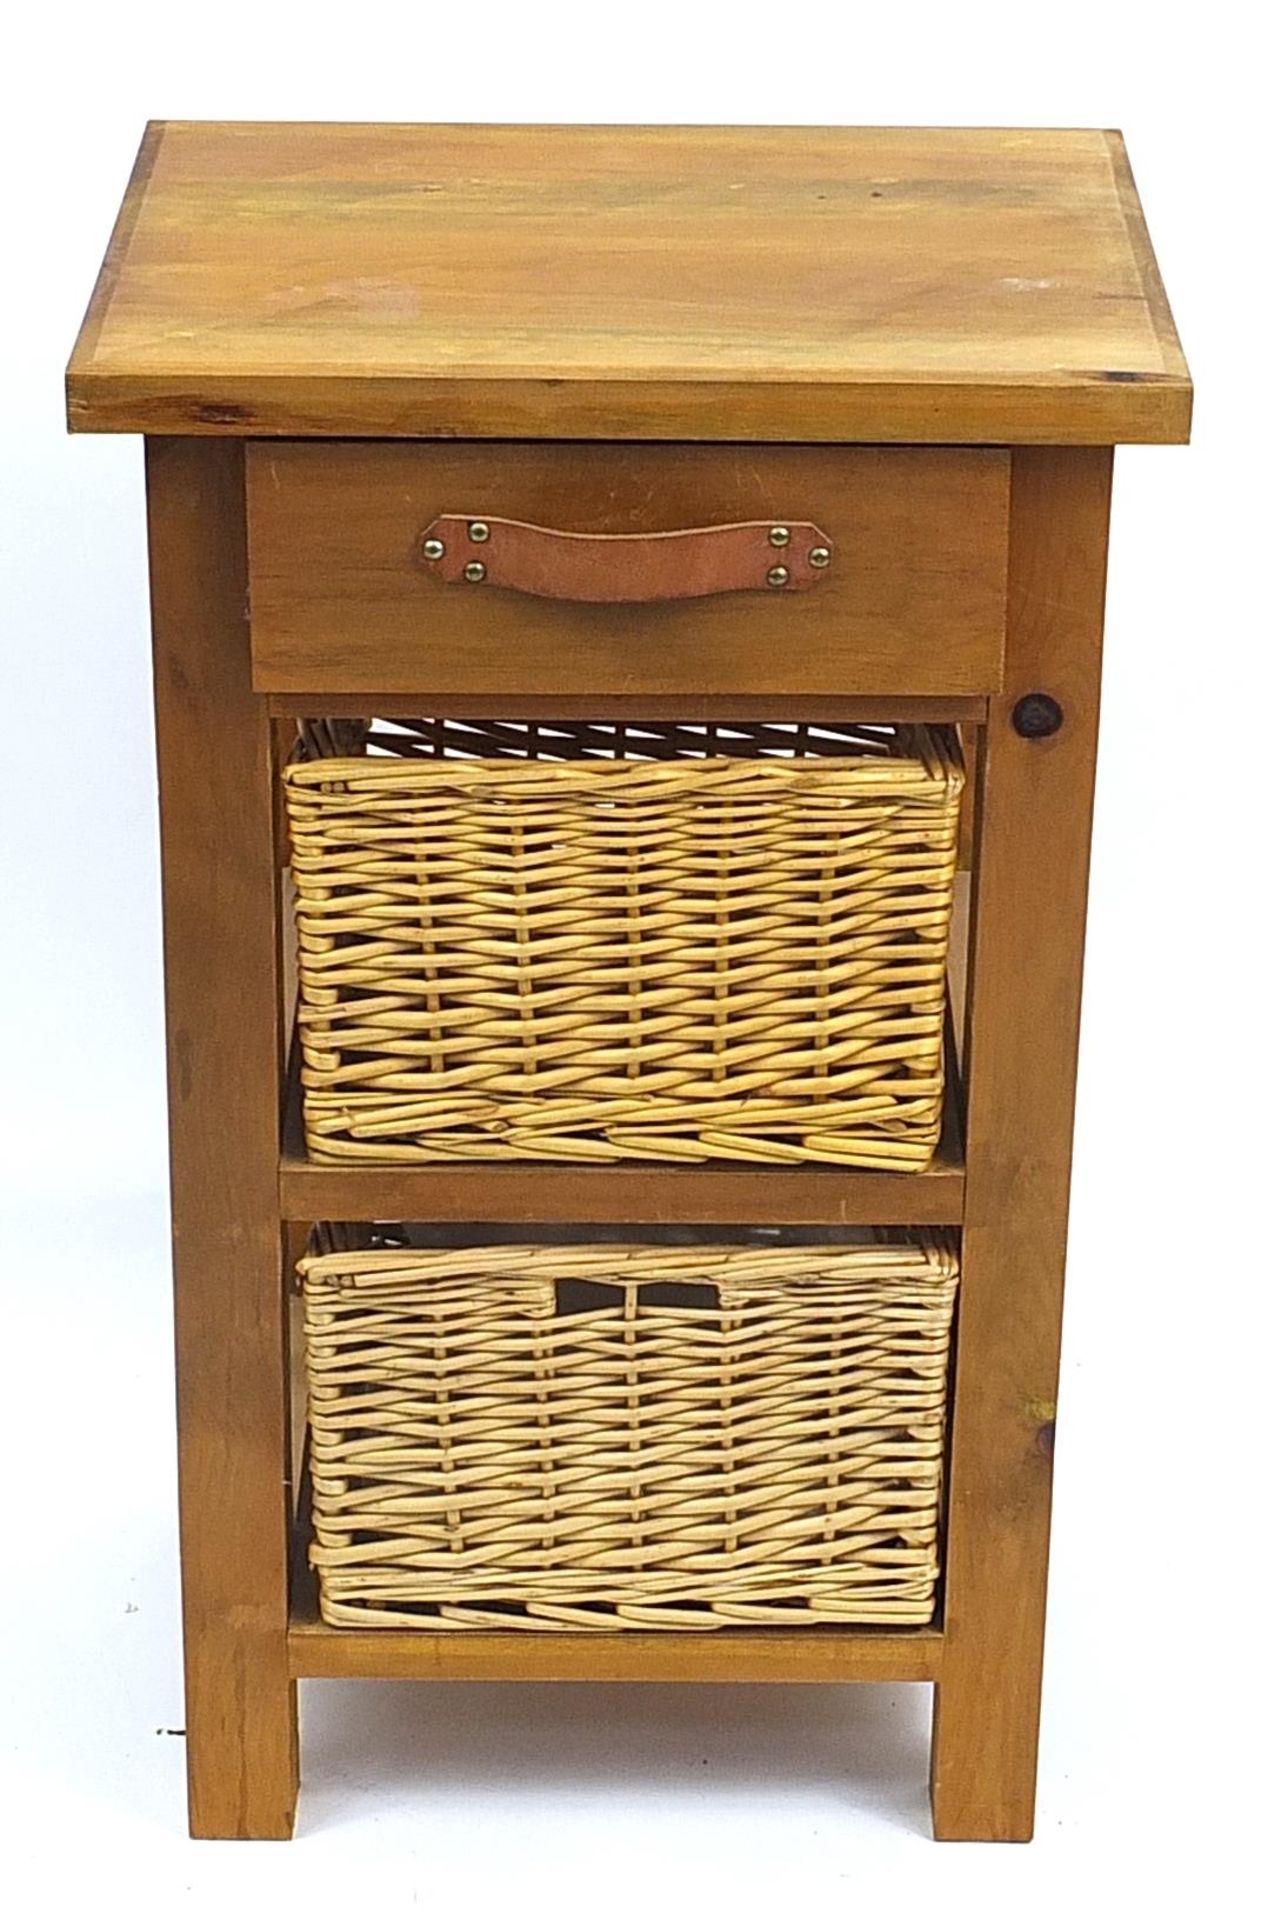 Pine side table with drawer and two wicker baskets, 80cm H x 50cm W x 40cm D - Image 2 of 3